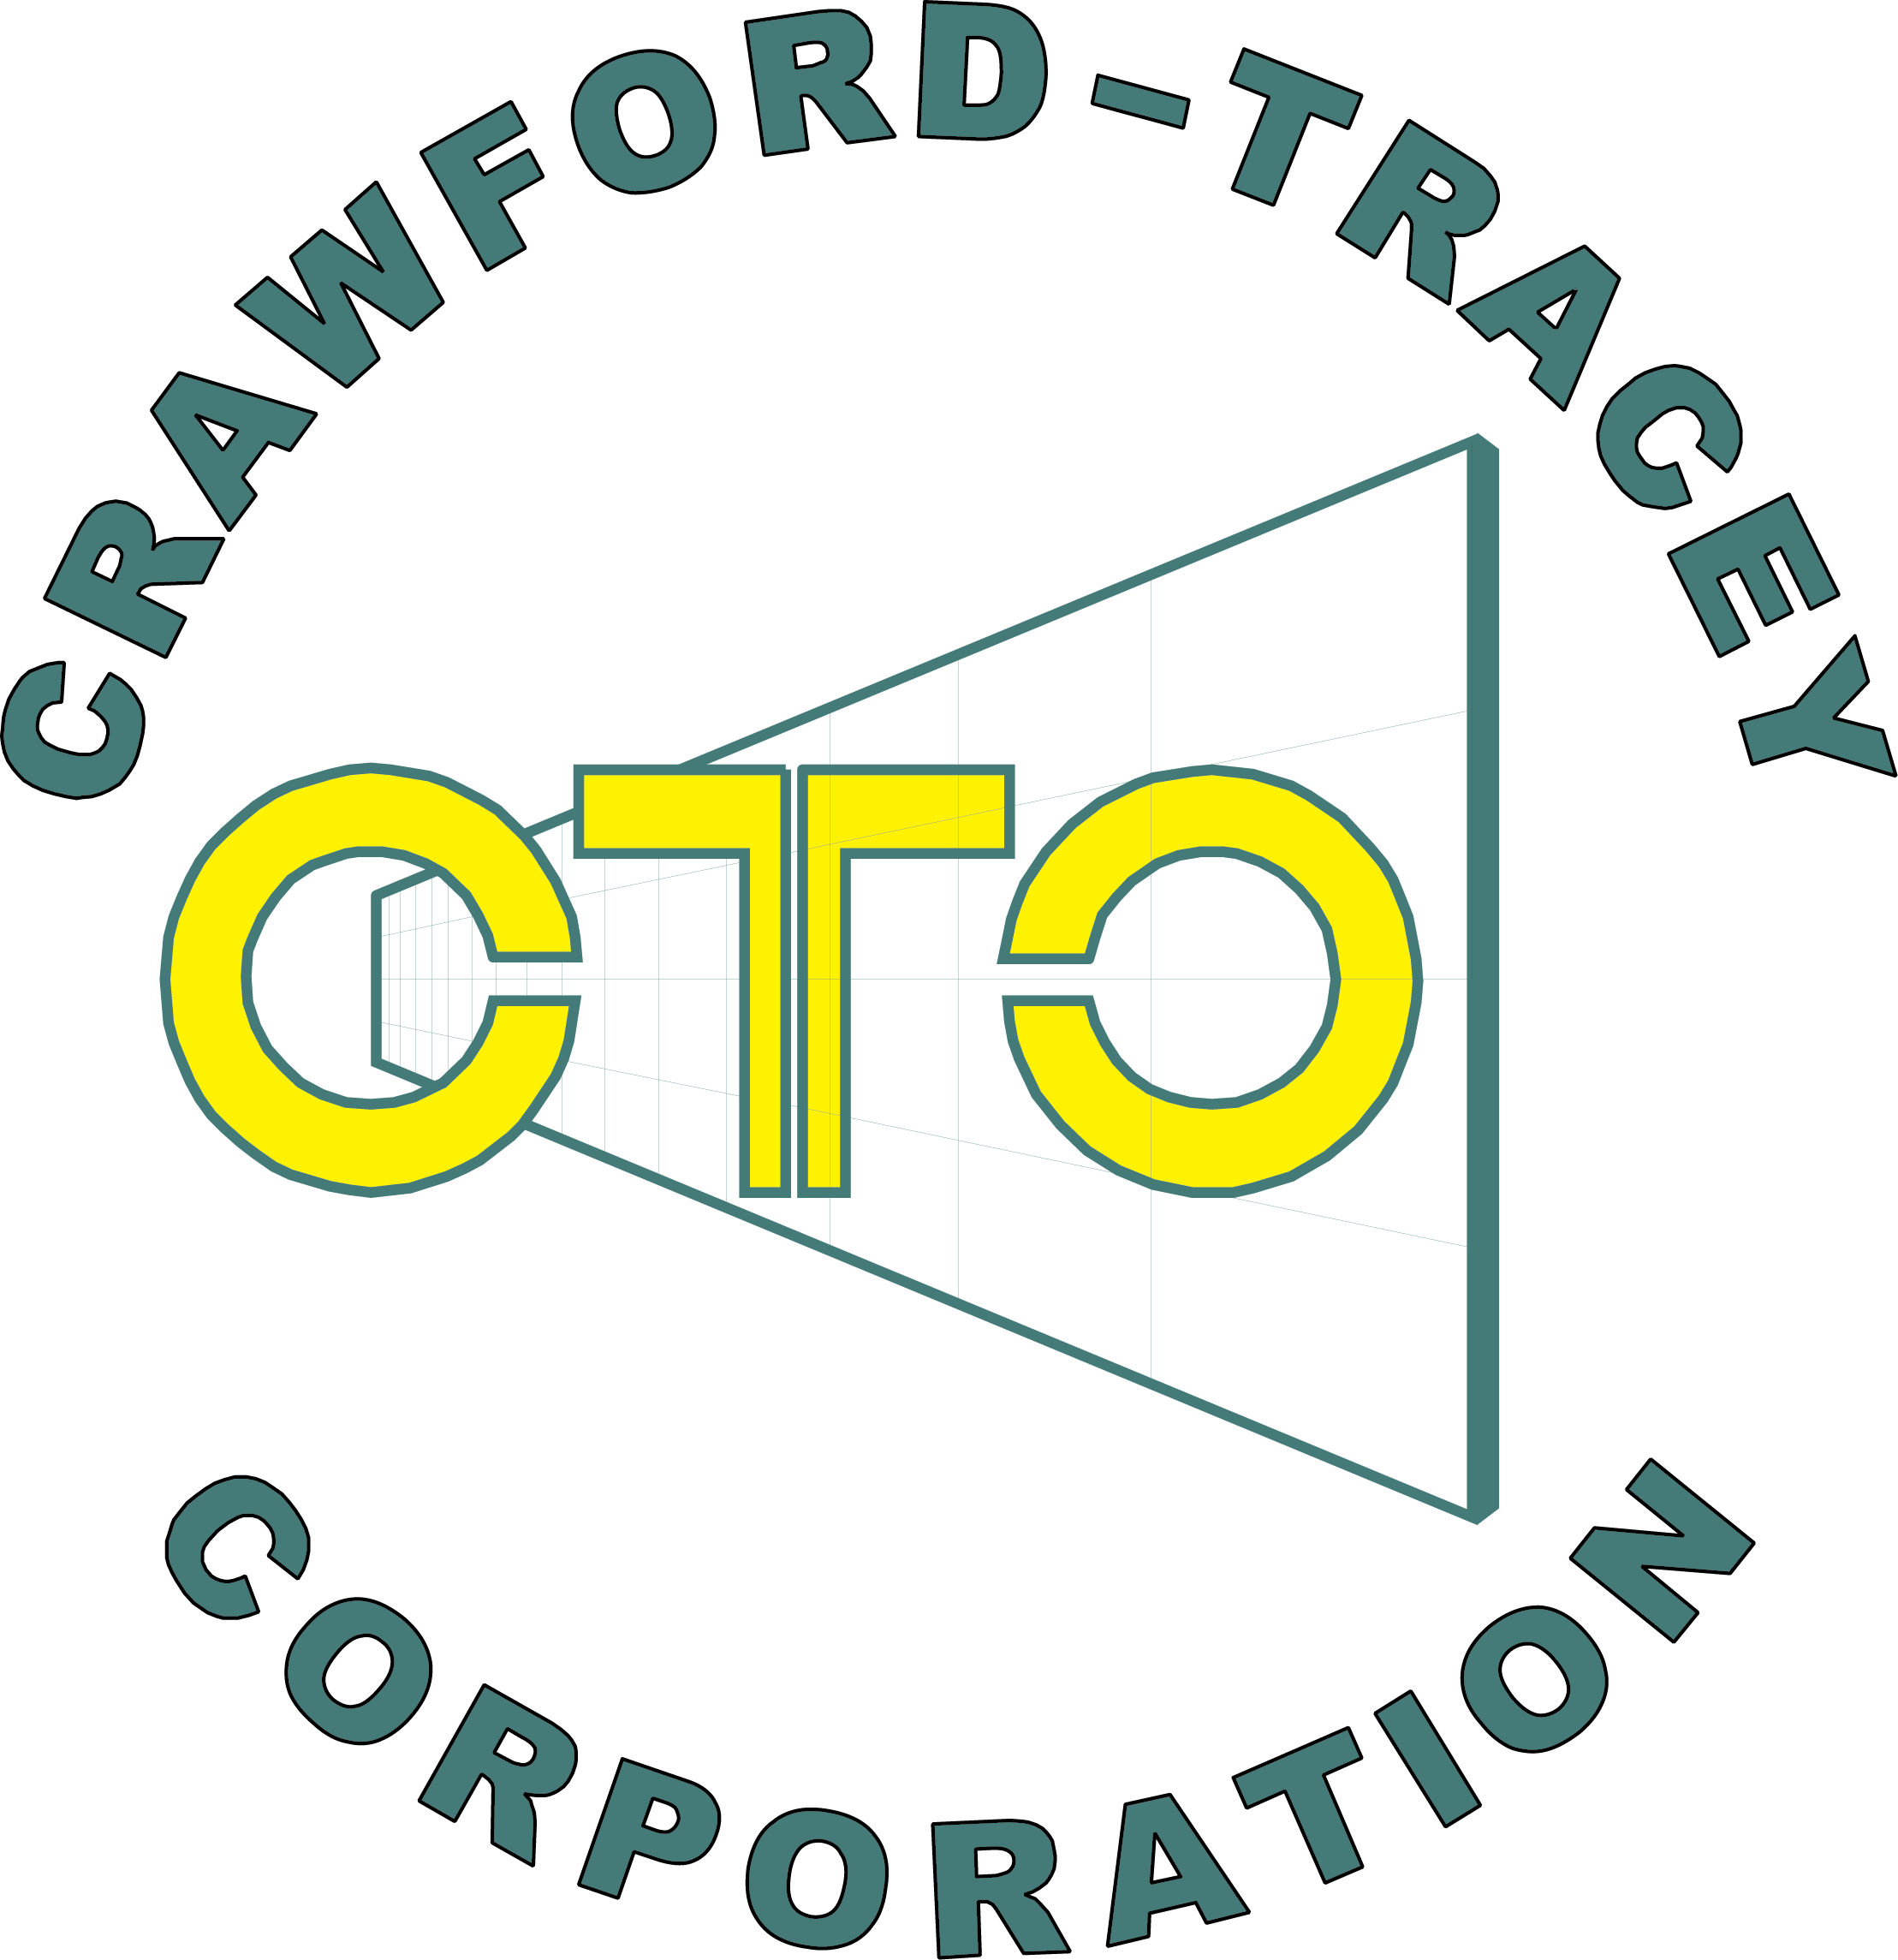 Crawford-Tracey Corp.